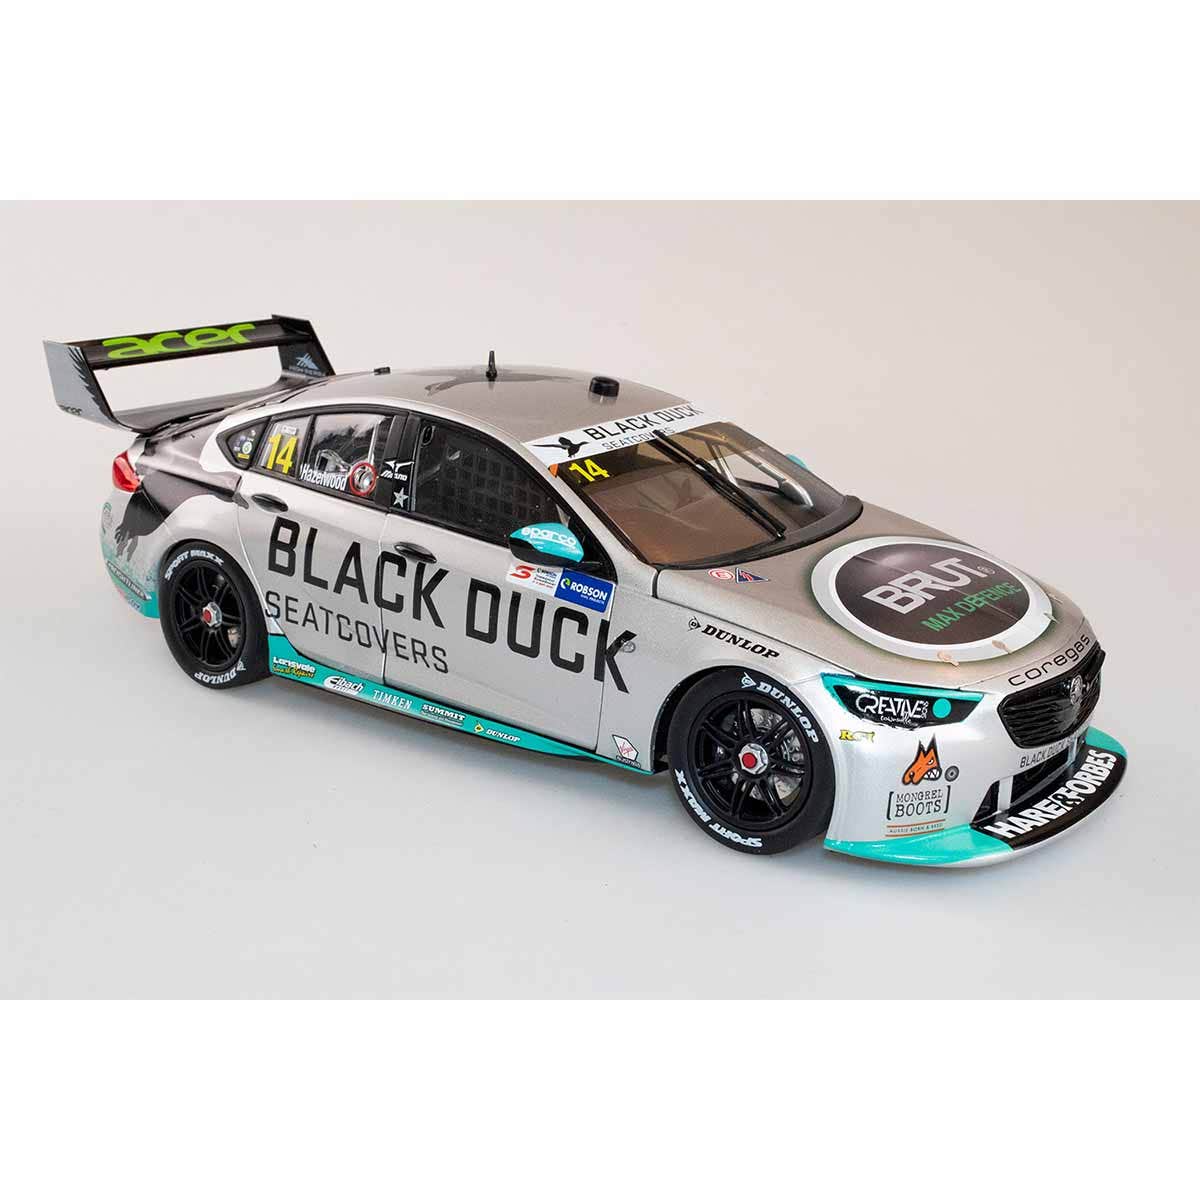 Holden ZB Commodore - Team Black Duck - #14, T.Hazelwood - Pole Position, Race 24, Robson Civil Projects Townsville SuperSprint - 1:18 Scale Diecast Model Car